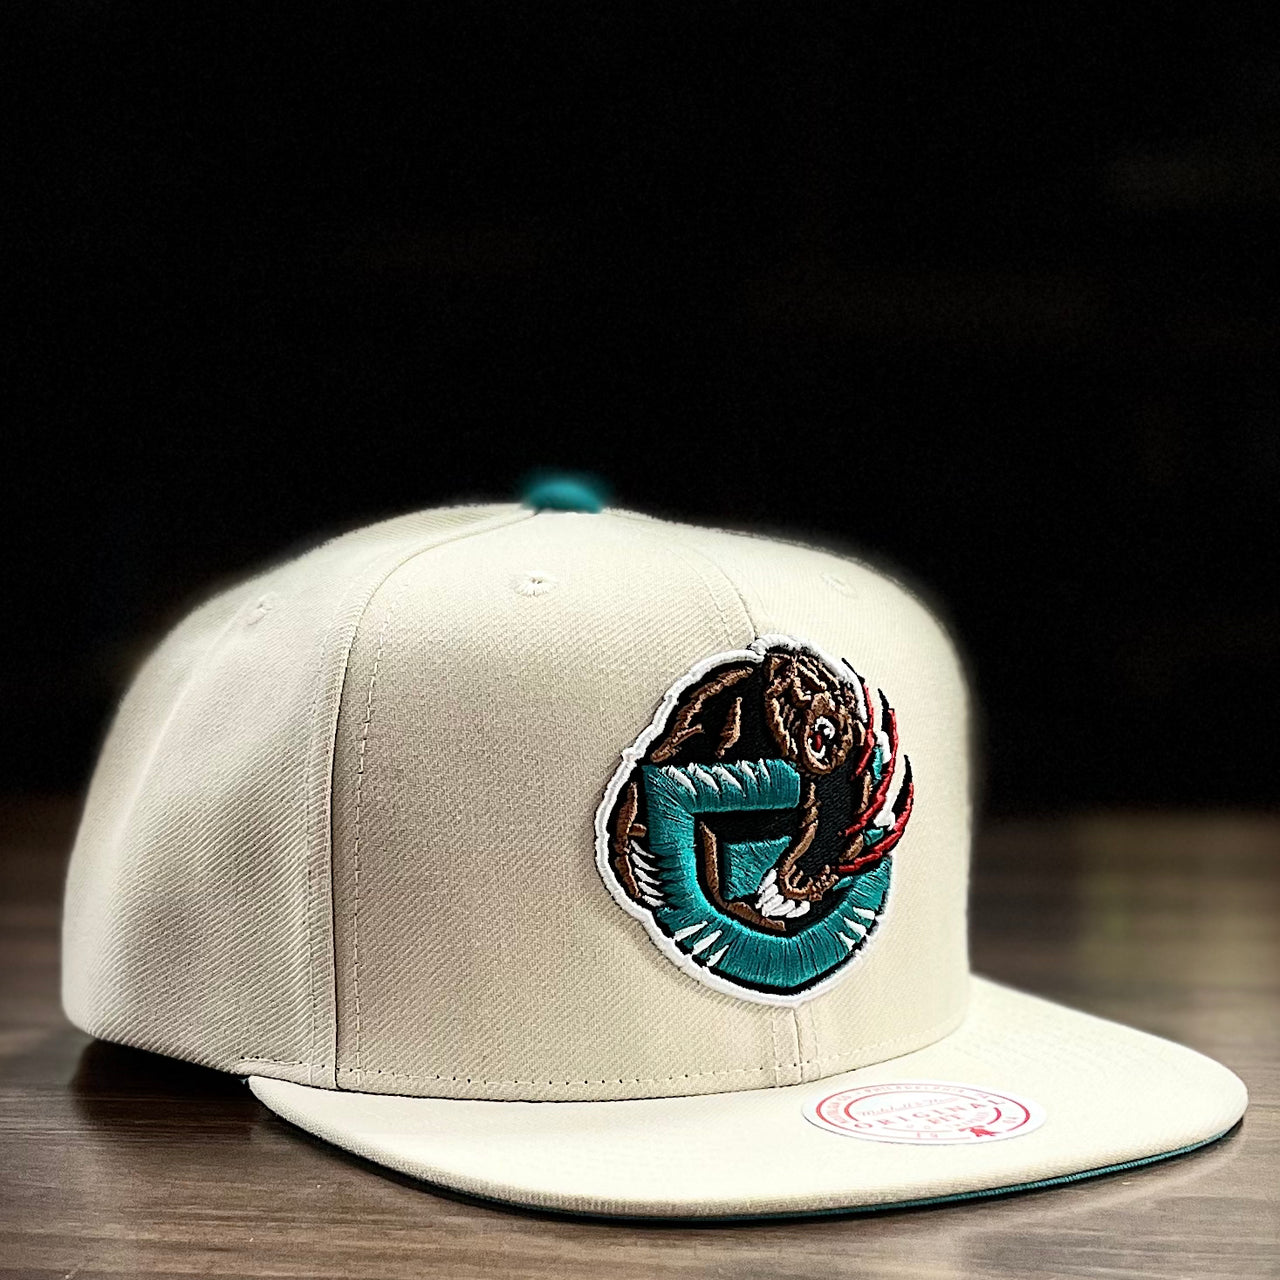 Mitchell & Ness Memphis Grizzlies 'Down for All' Original Fit Snapback Teal